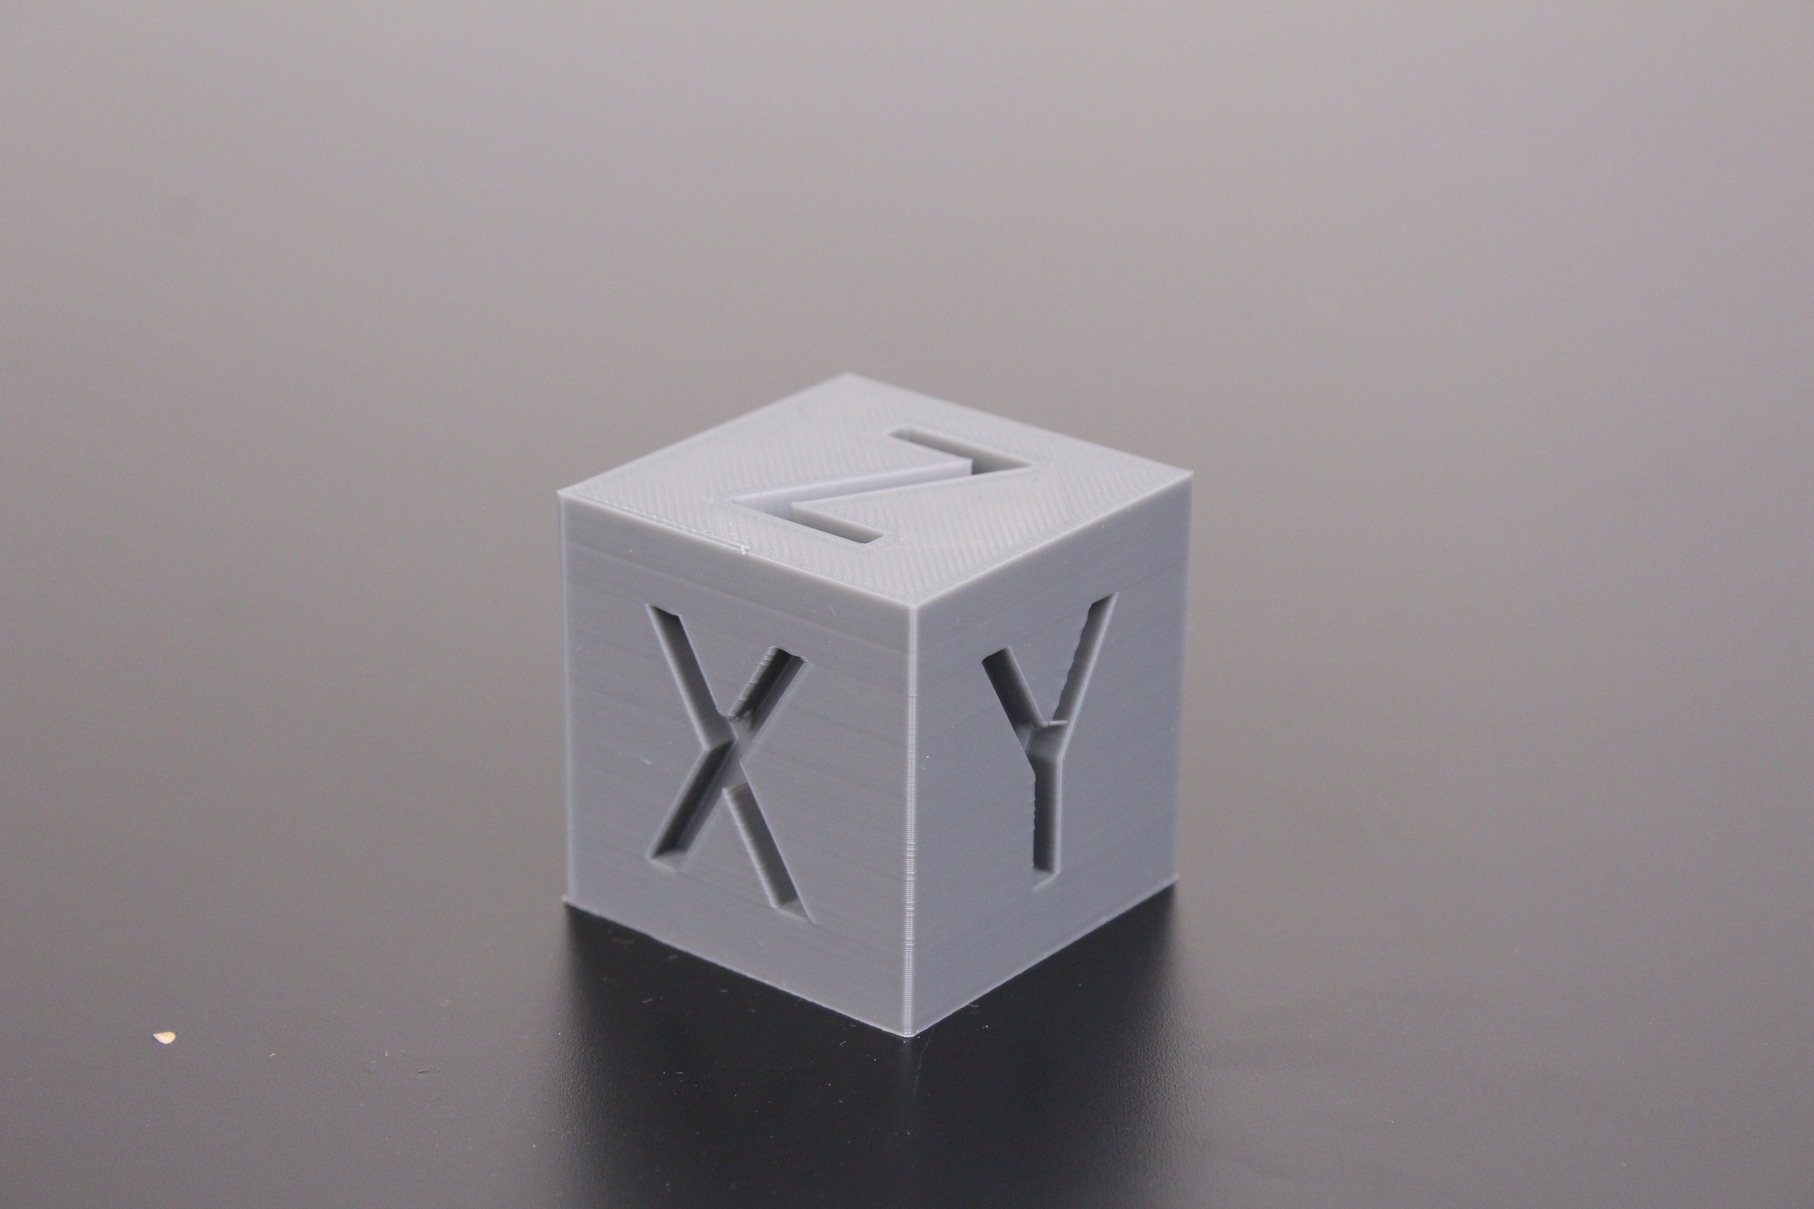 200 percent Calibration Cube printed on Voxelab Aries 4 | Voxelab Aries Review: A Worthy Upgrade for the Aquila?